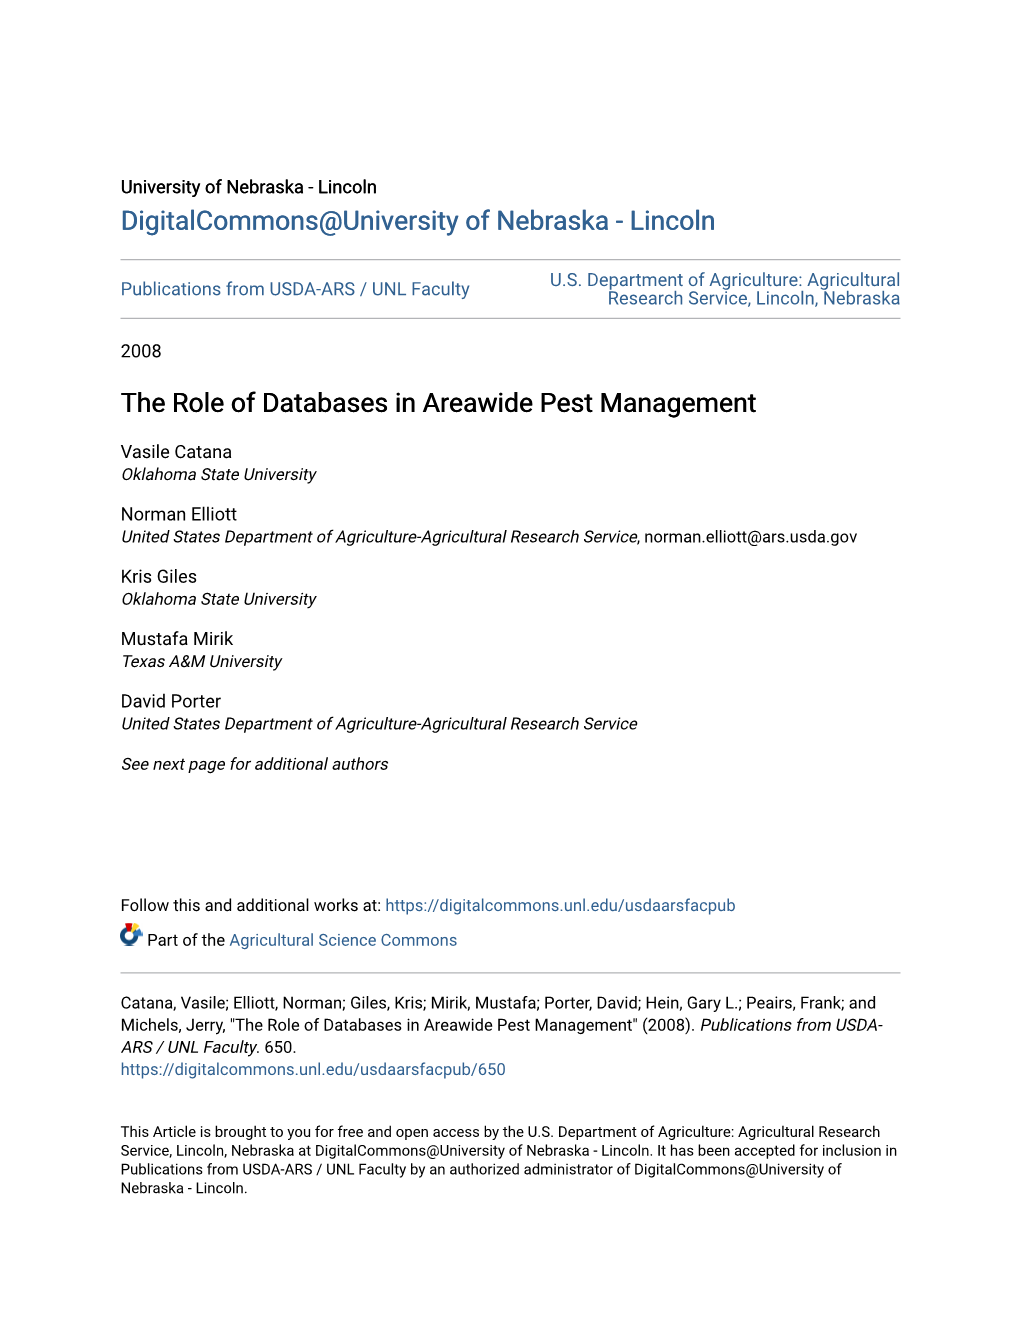 The Role of Databases in Areawide Pest Management